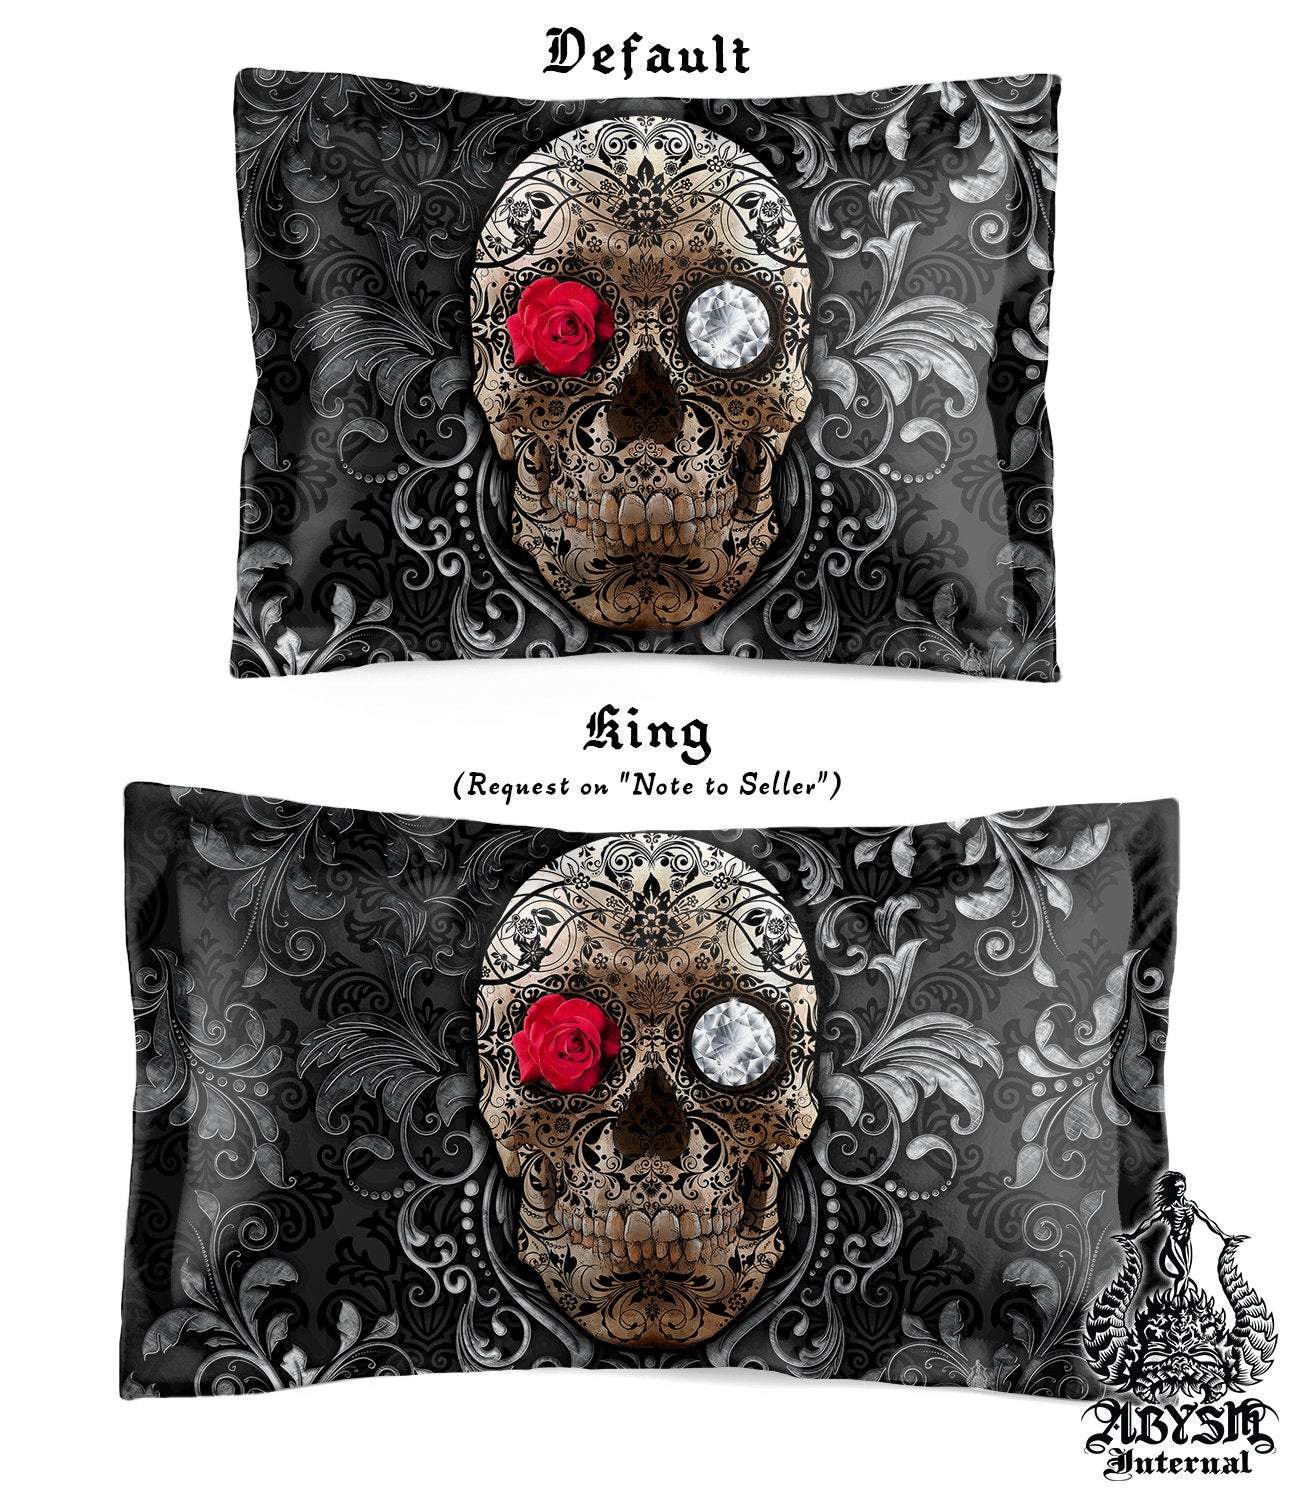 Gothic Sugar Skull Bedding Set, Comforter and Duvet, Goth Bed Cover and Bedroom Decor, King, Queen and Twin Size - Day of the Dead - Abysm Internal